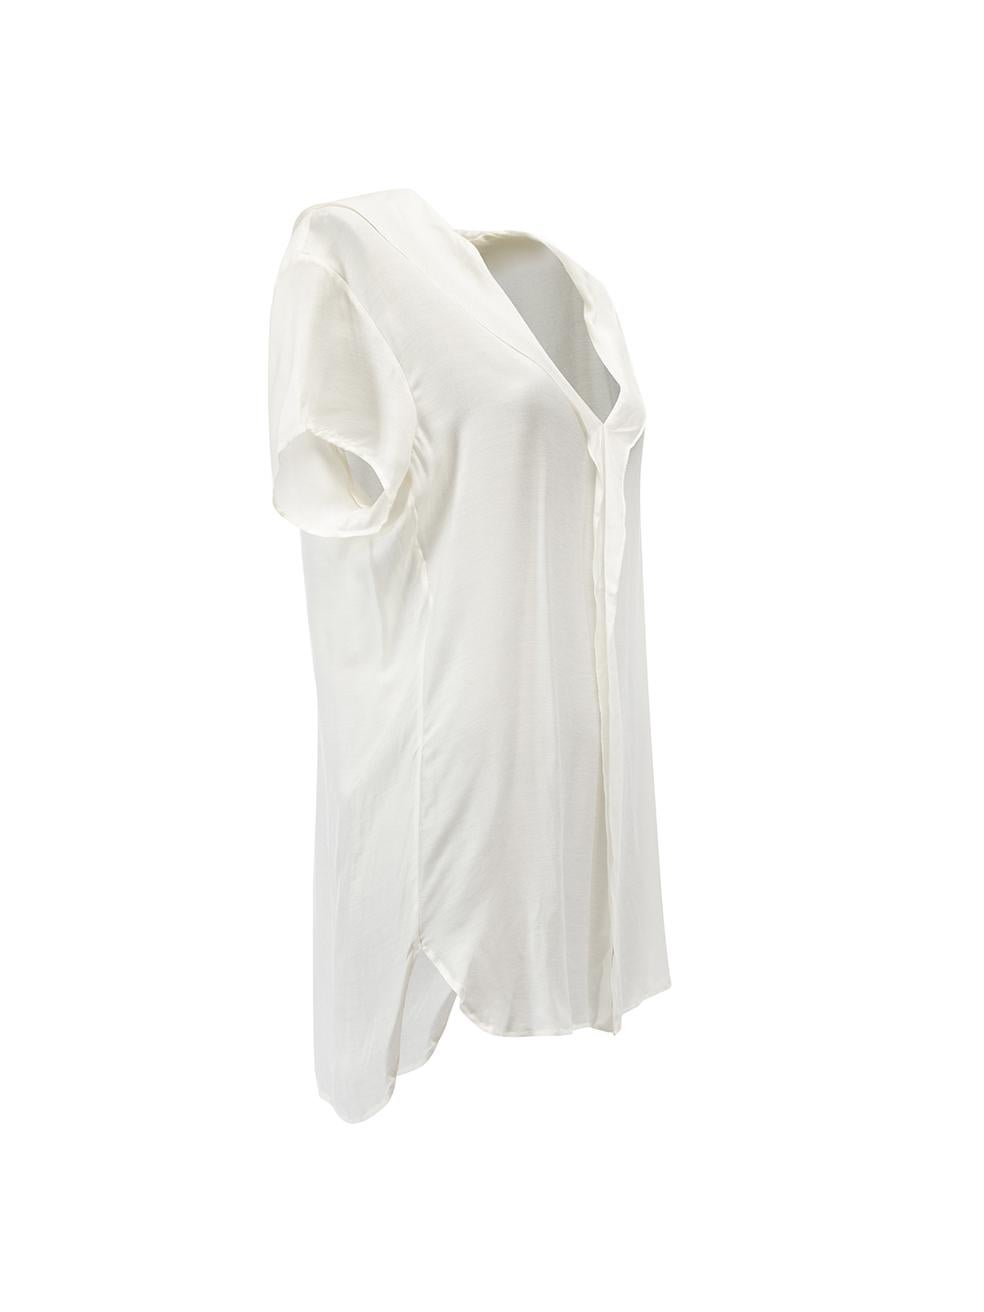 CONDITION is Very good. Hardly any visible wear to blouse is evident on this used Lanvin designer resale item. Details Cream Viscose Short sleeve blouse V neckline Floty ruffles design Side vents Made in Italy Composition 72% Viscose, 20% Silk and